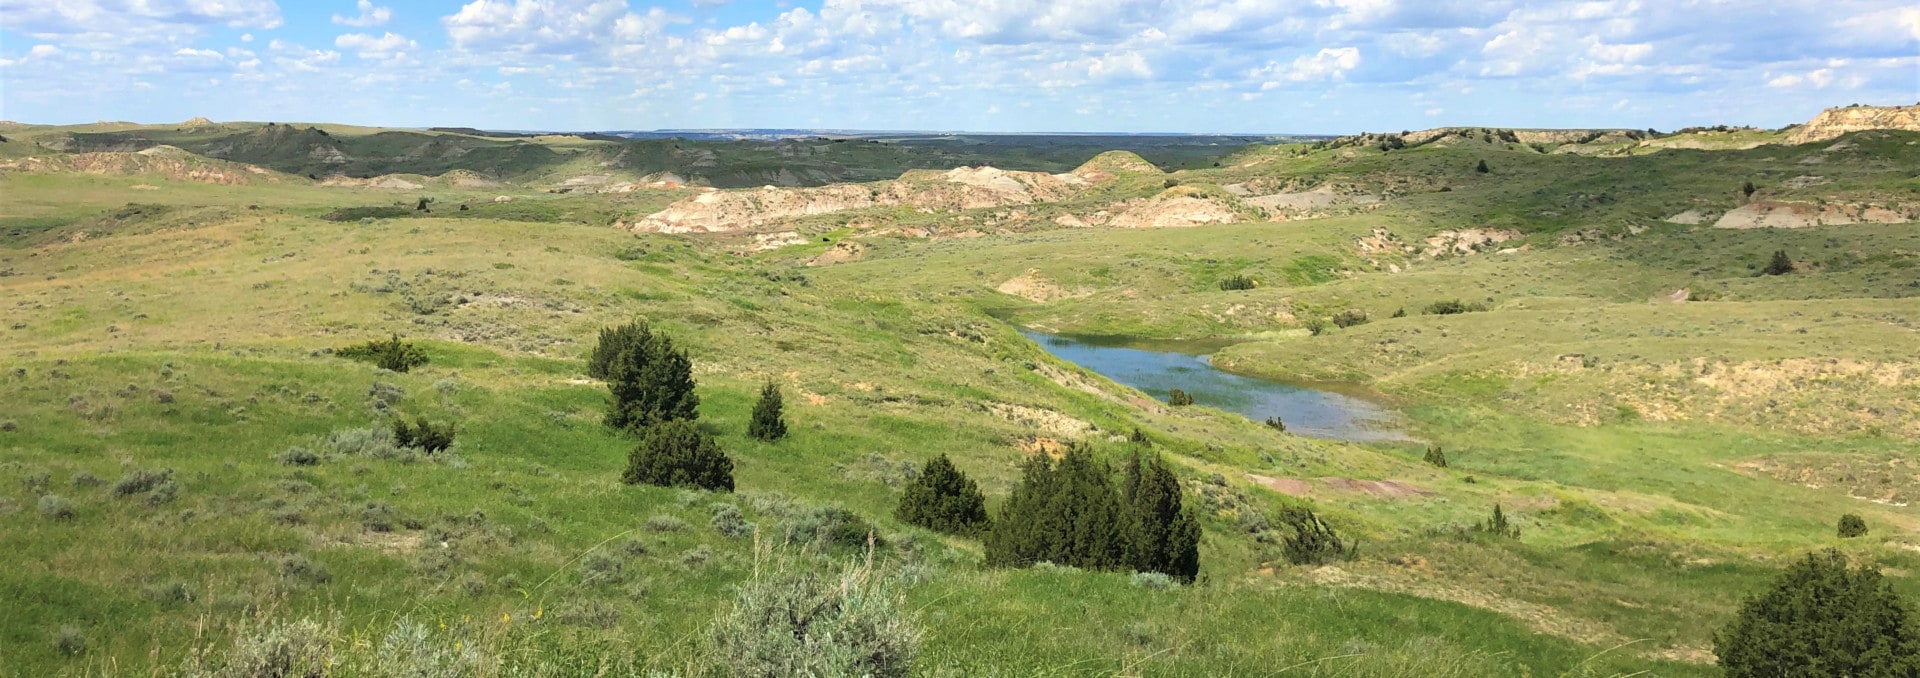 montana farm ranch for sale plum coulee fork ranch